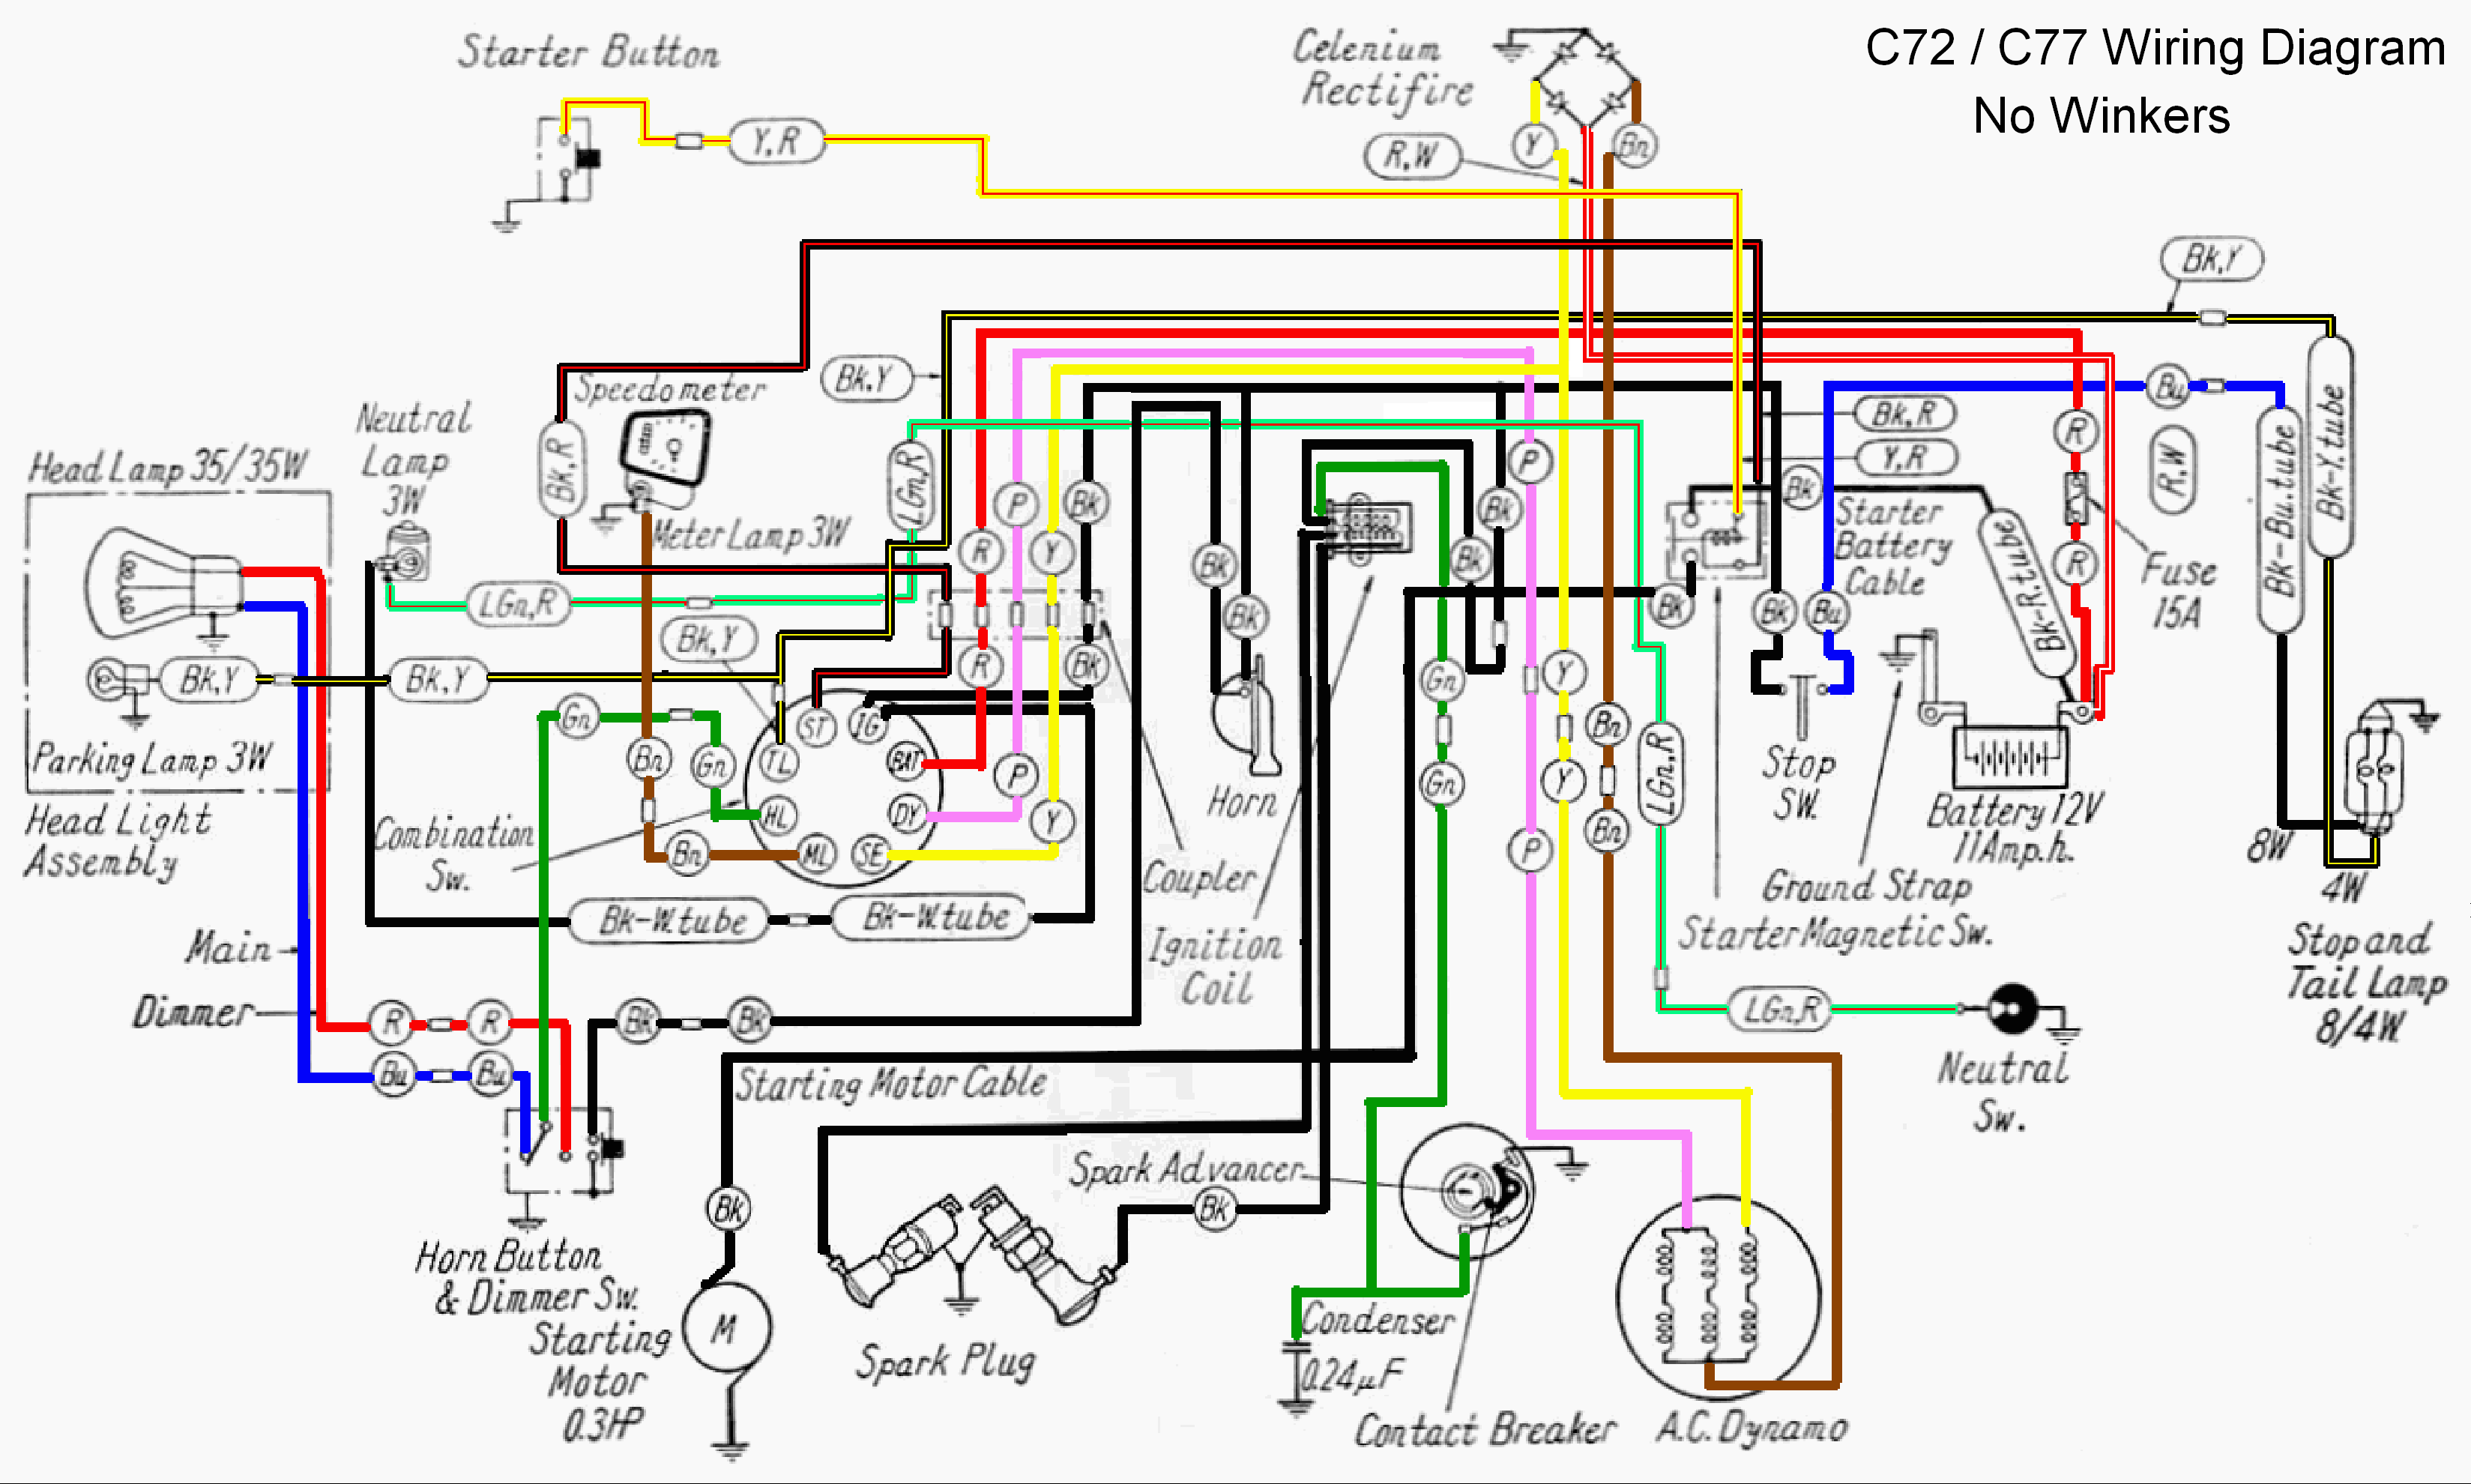 A diagram of the wiring harness I often referenced honda 305 wiring diagram 